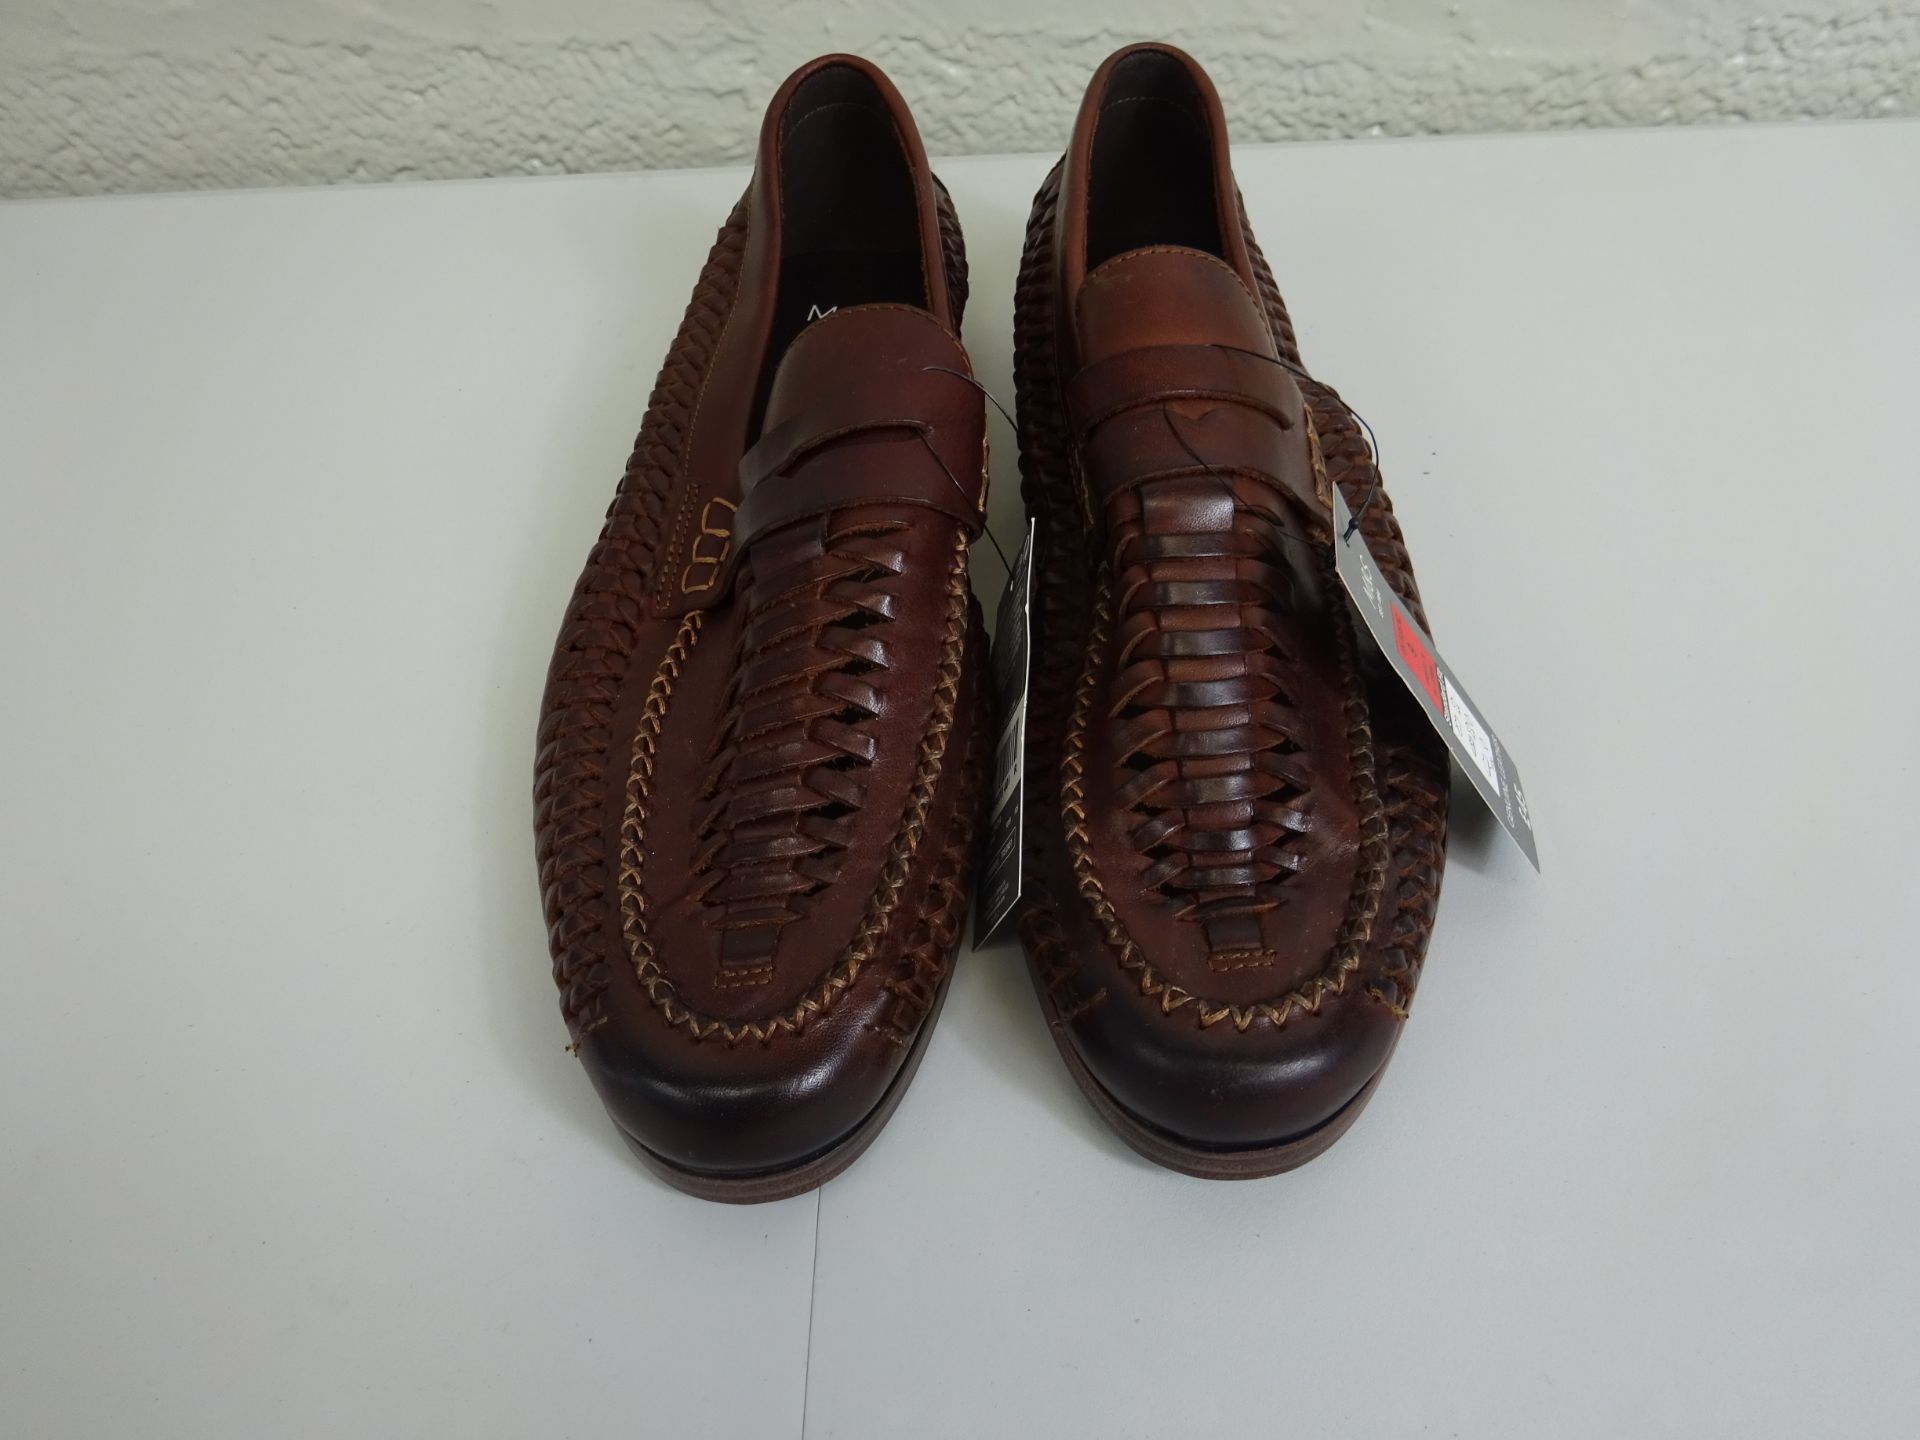 M & S Size 9 Mens leather shoes - RRP £45.00